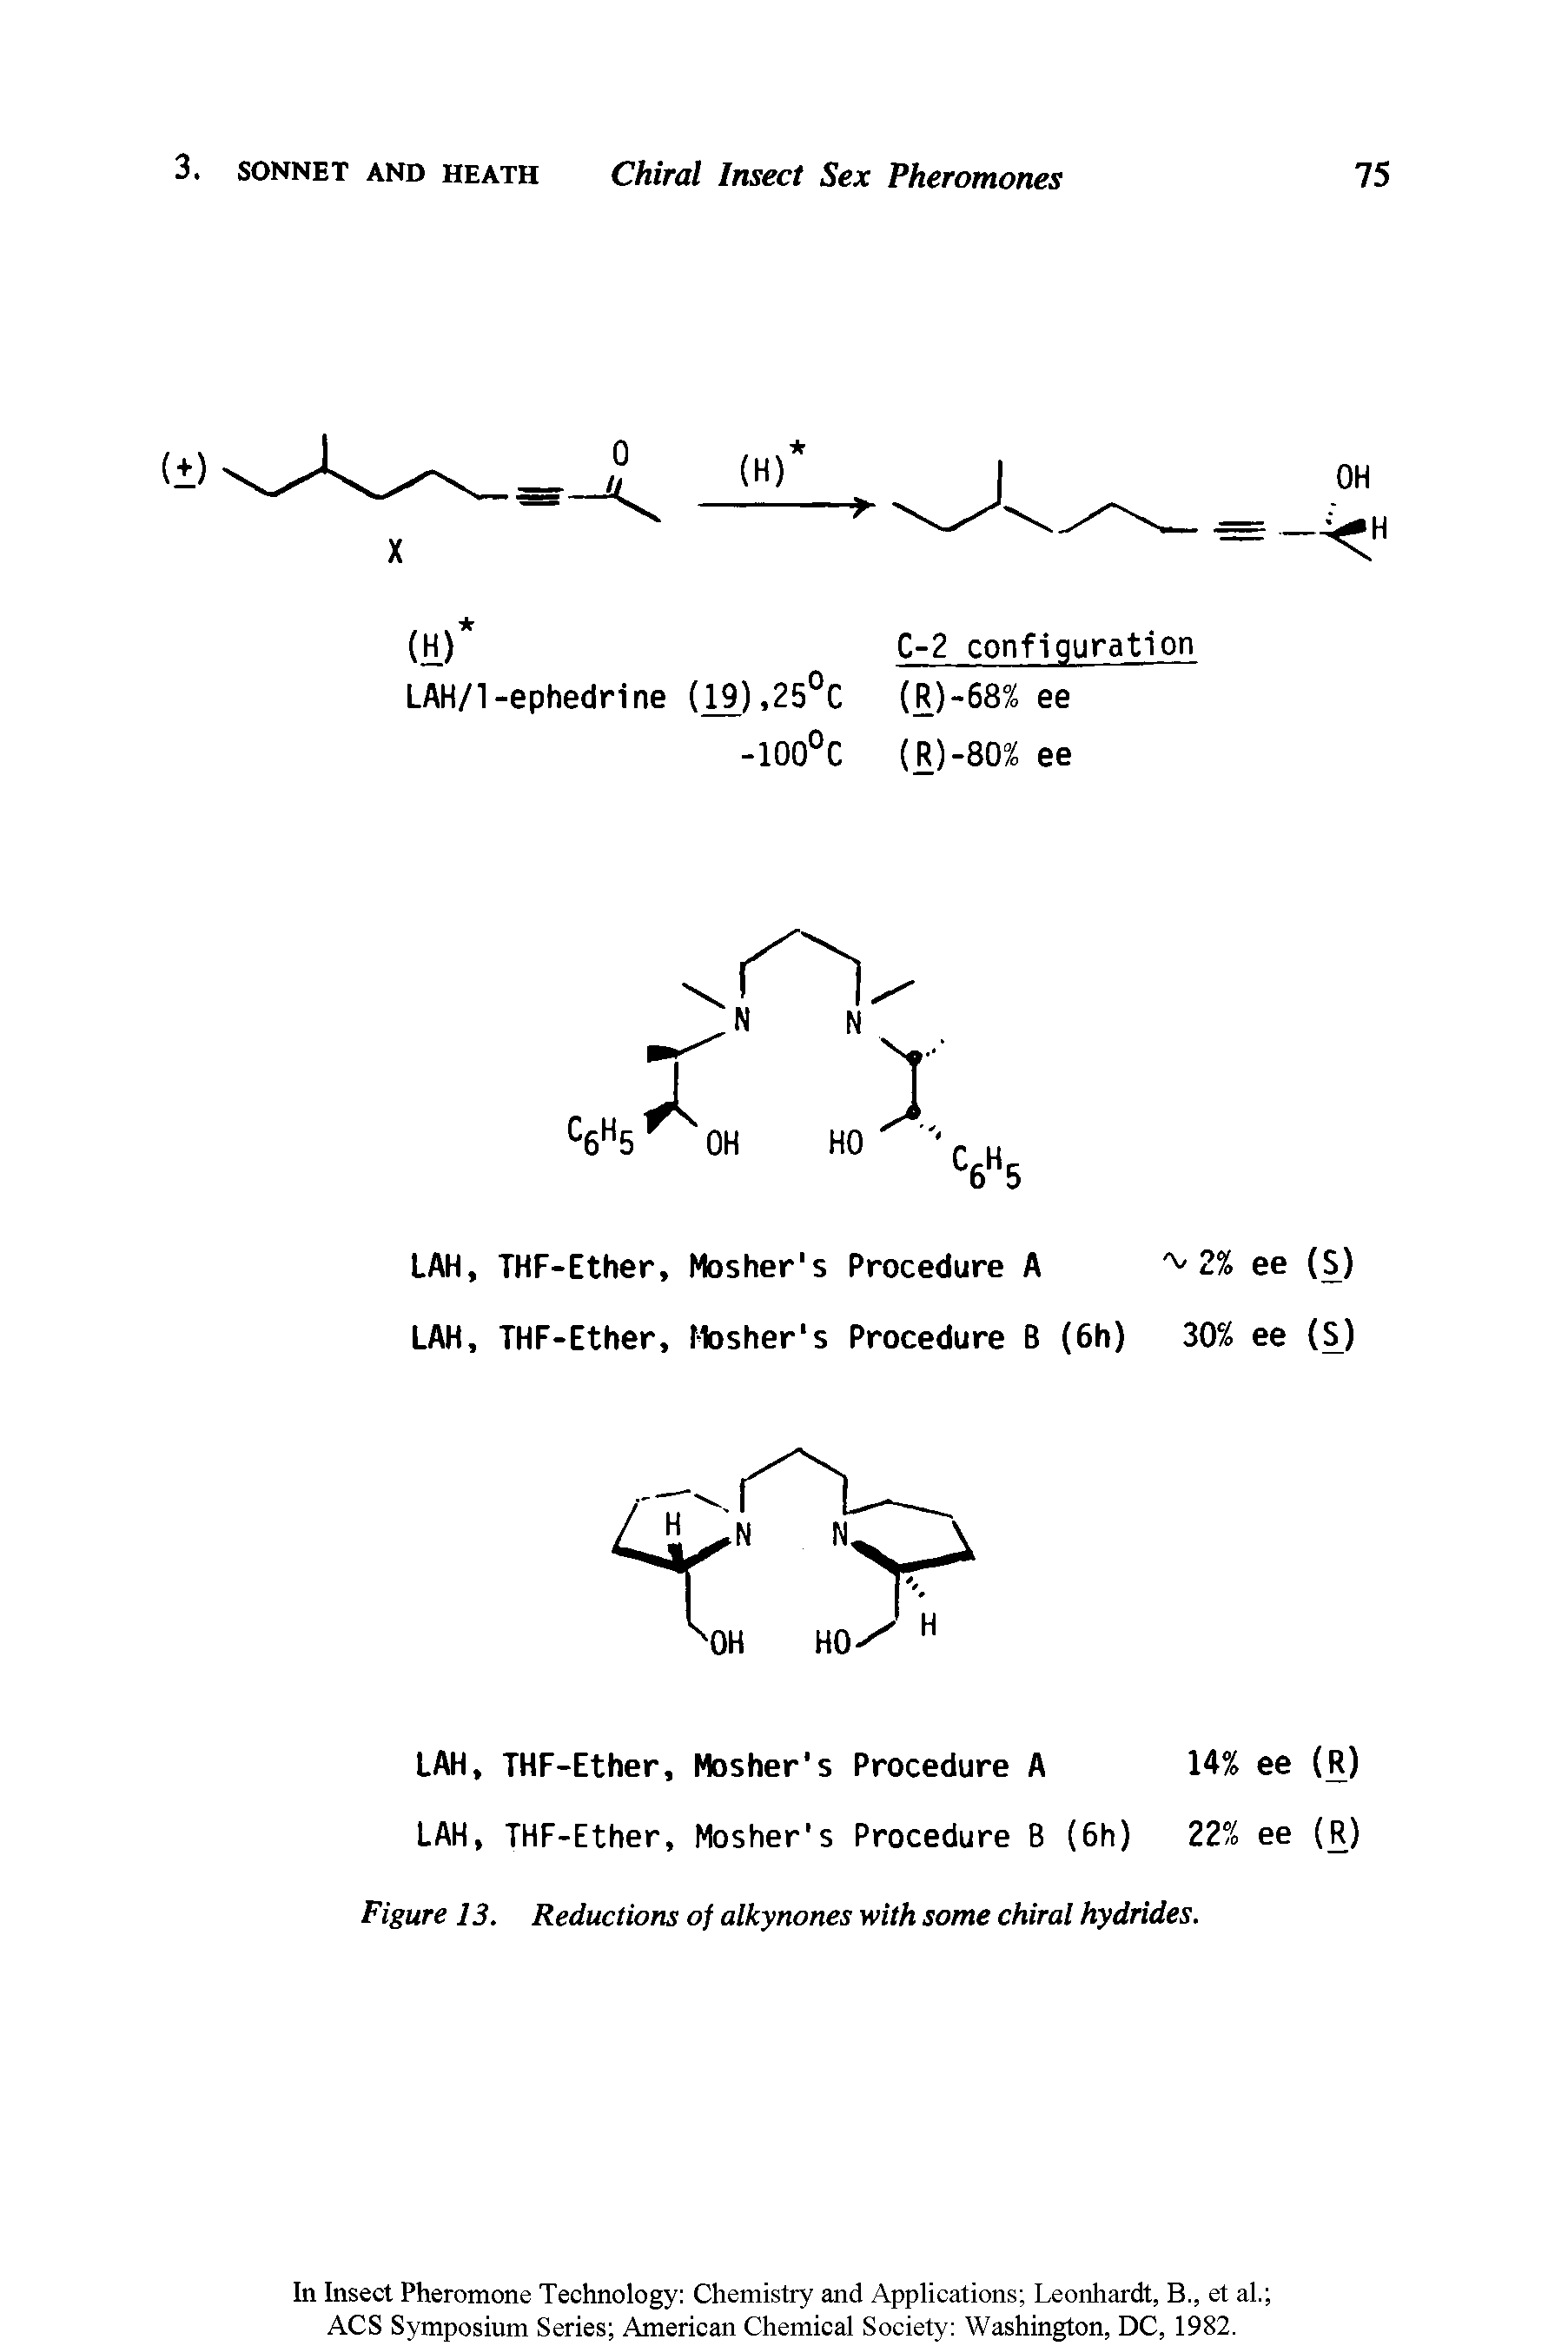 Figure 13. Reductions of alkynones with some chiral hydrides.